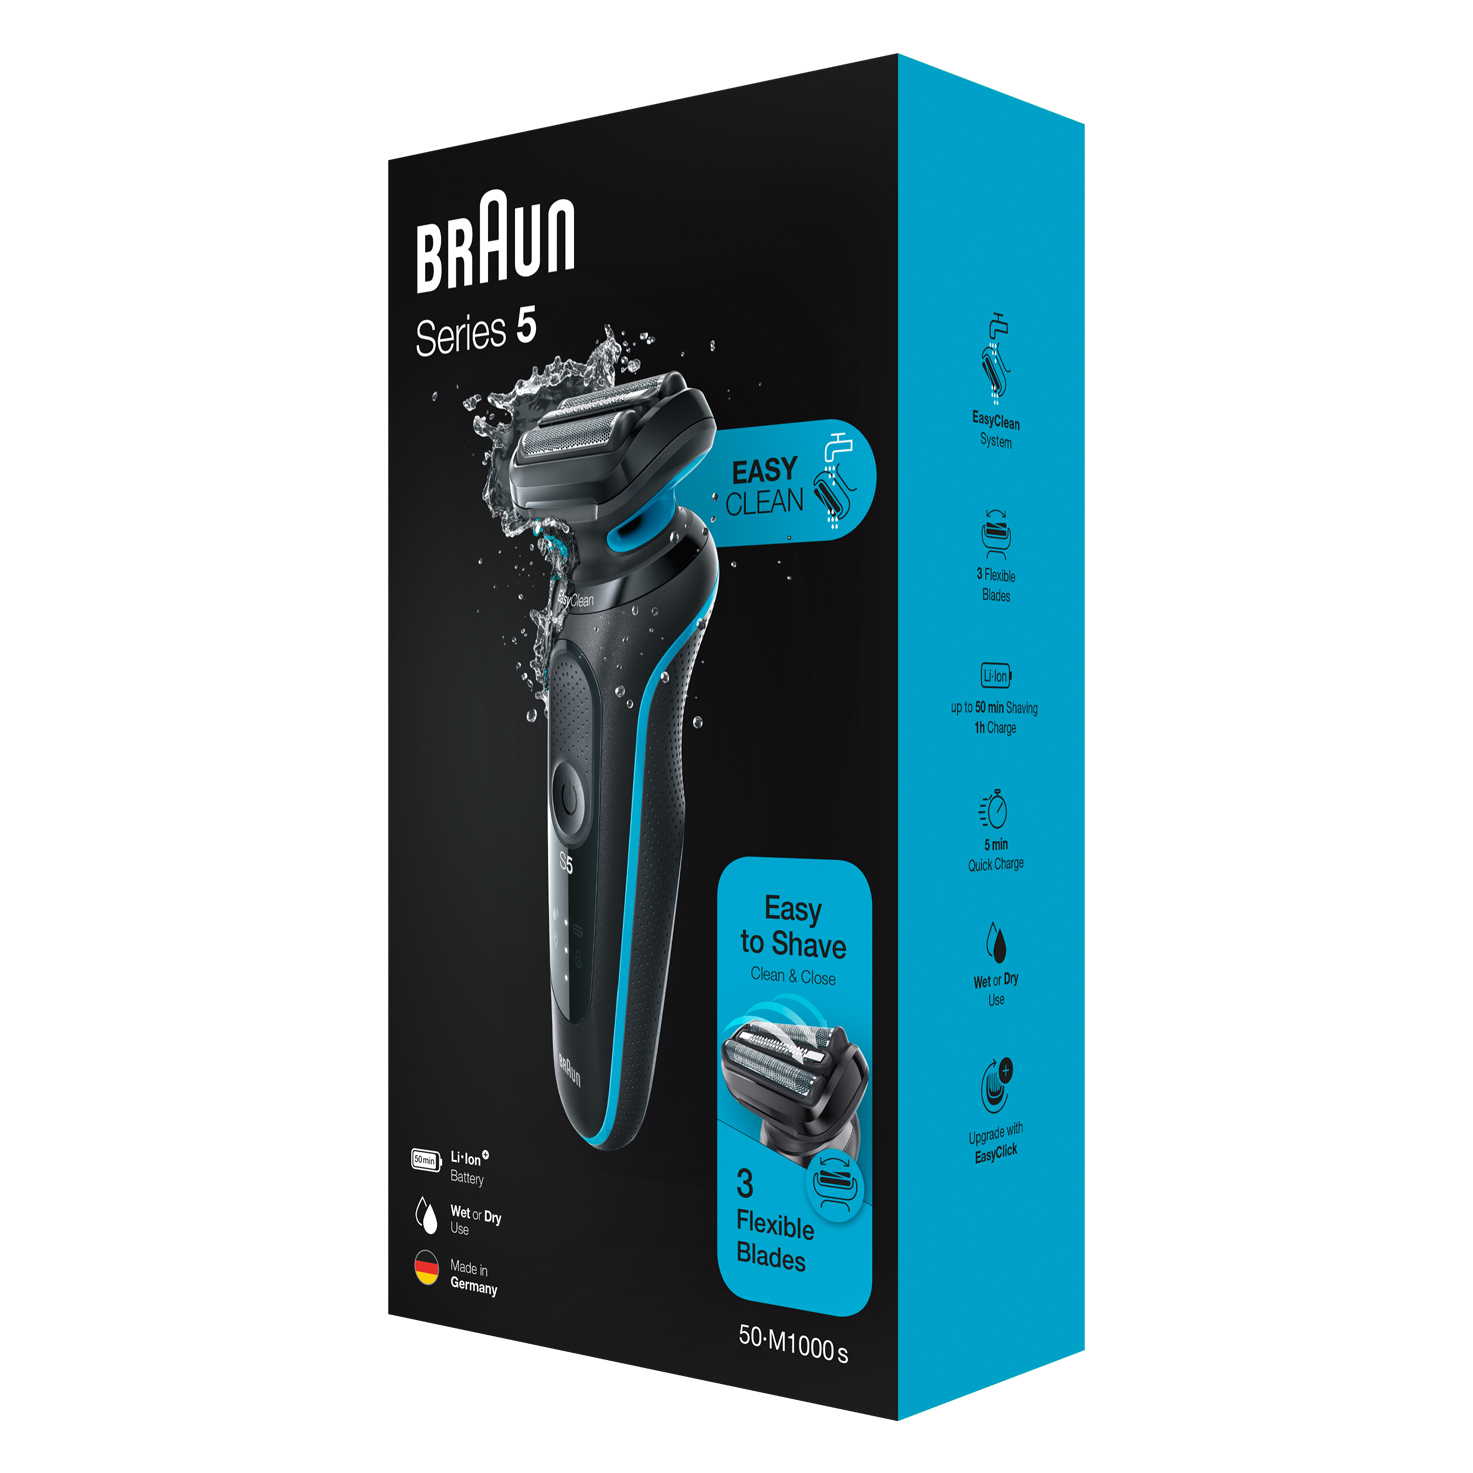 Braun Electric Hair Clipper for men, Series 5, for dry & wet use, Blue × Black,  50-M1000s